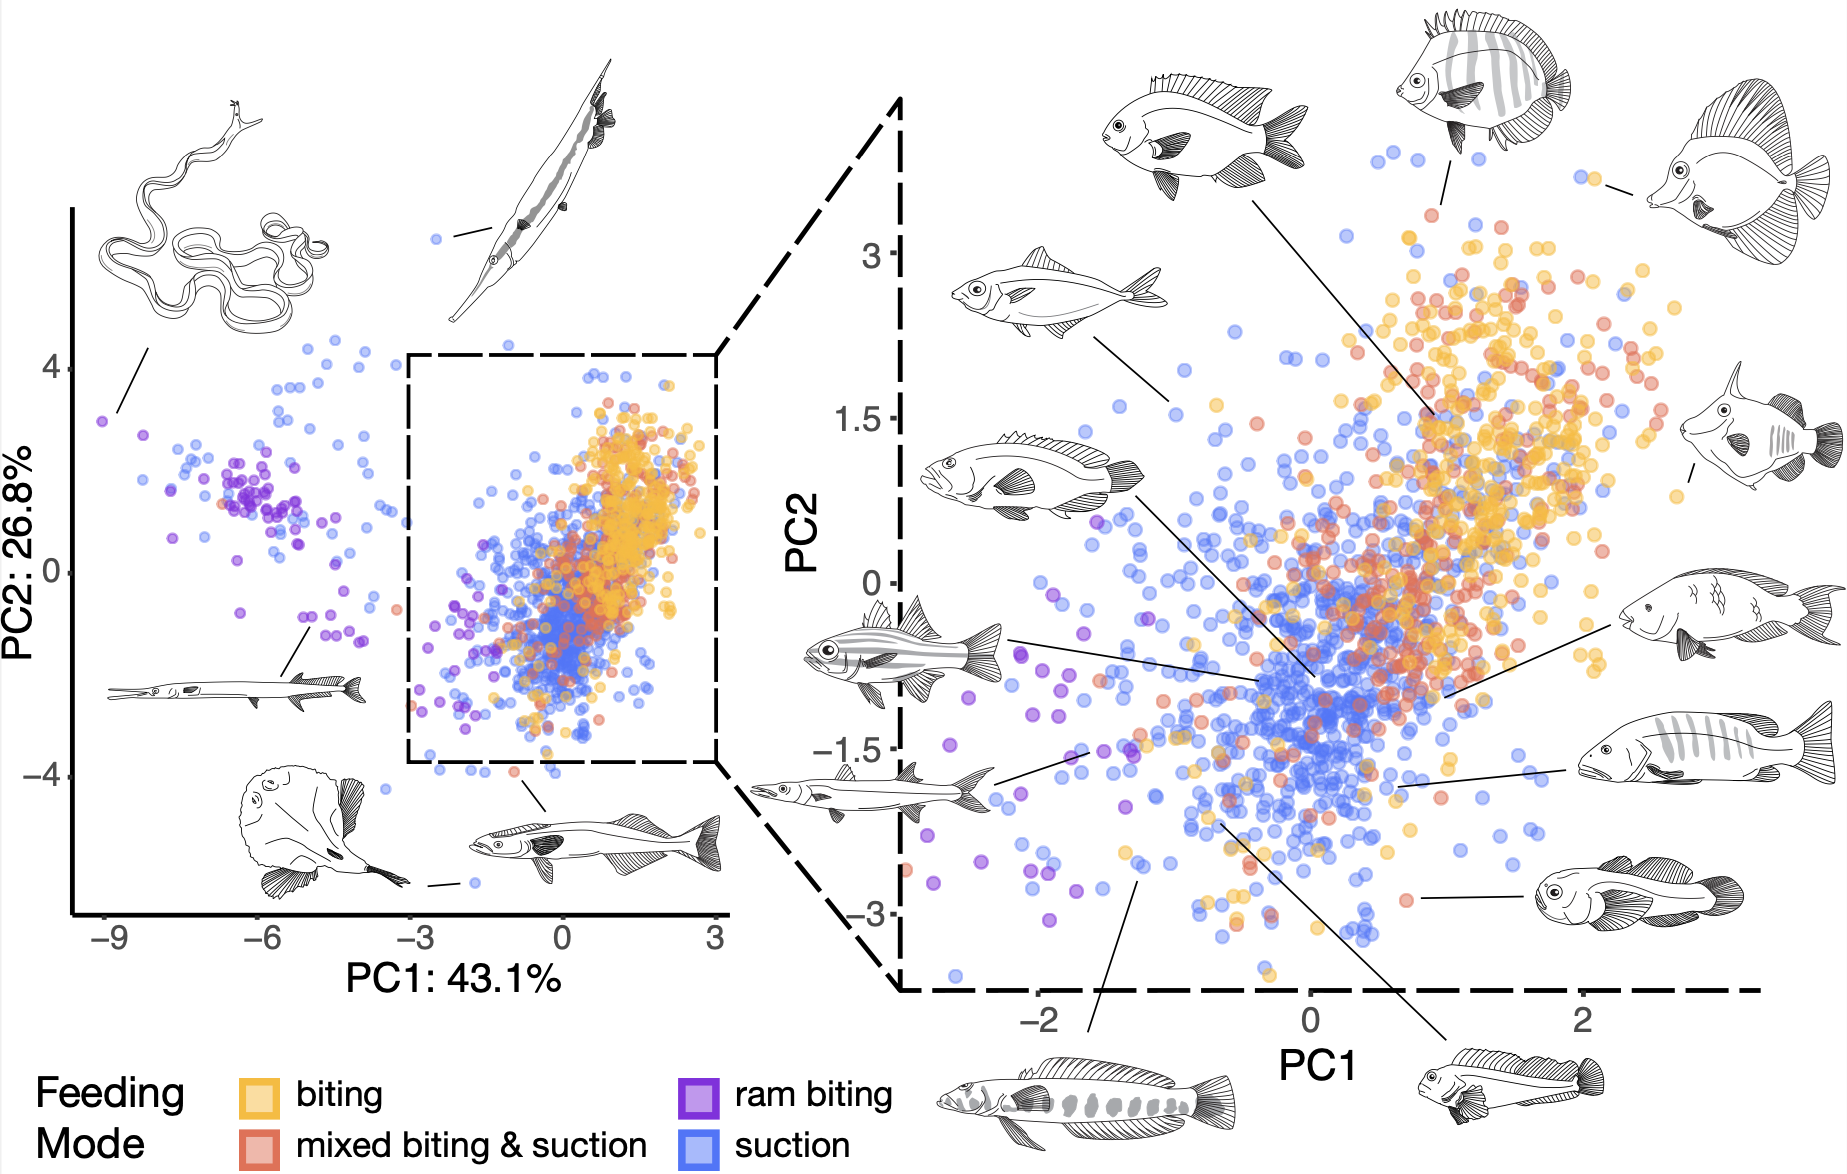 Diversity of body shape among reef fishes that use different feeding modes; figure from Corn et al 2022 PNAS